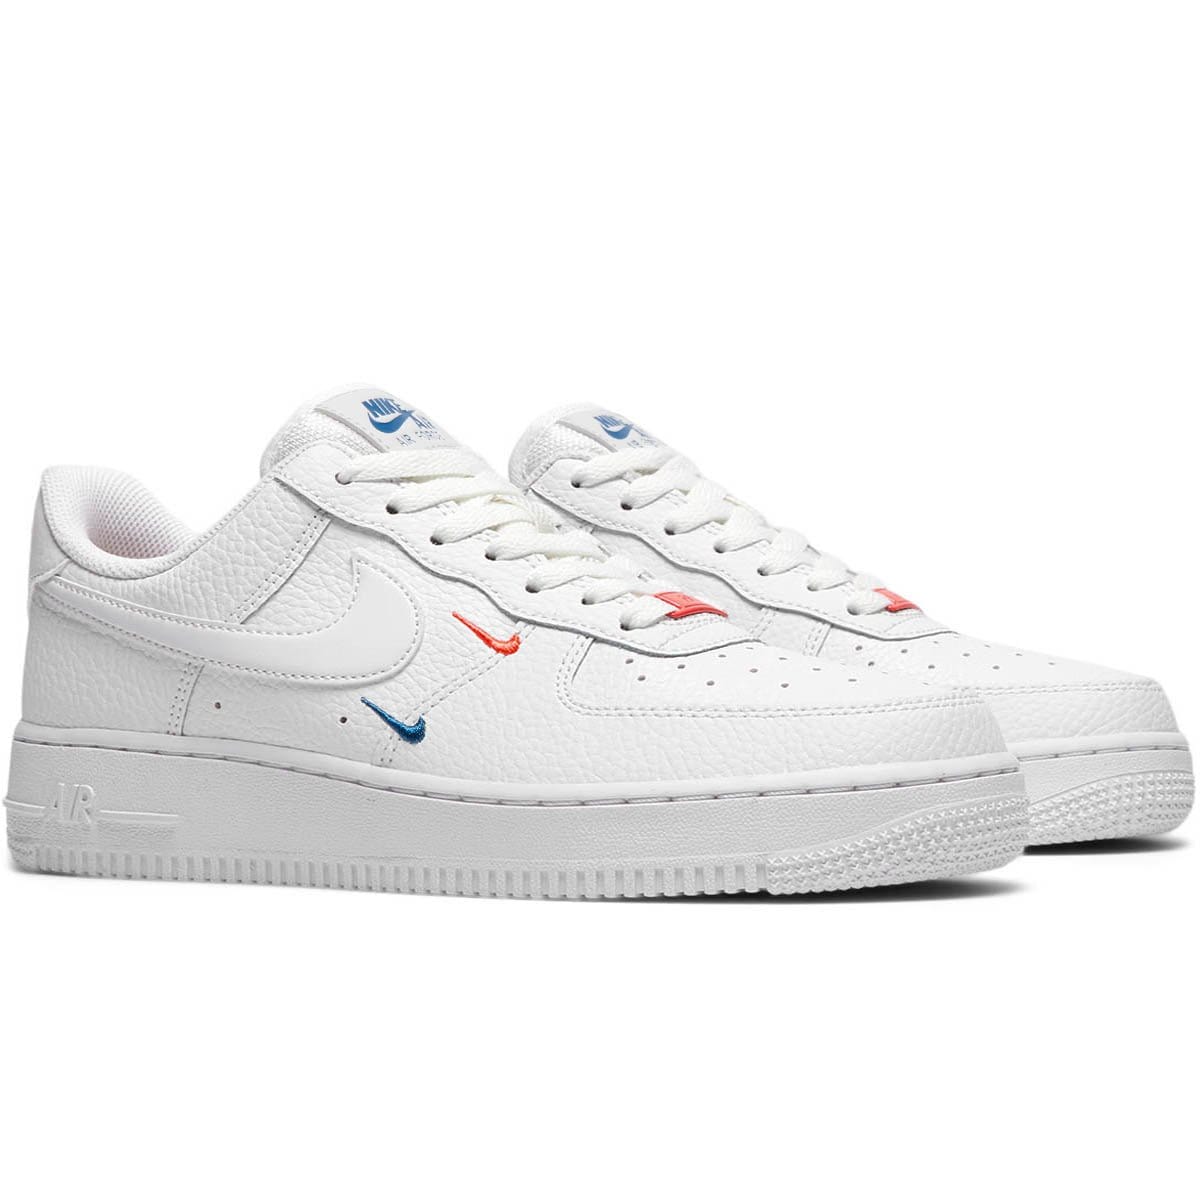 Nike Shoes WOMEN'S AIR FORCE 1 '07 ESSENTIAL